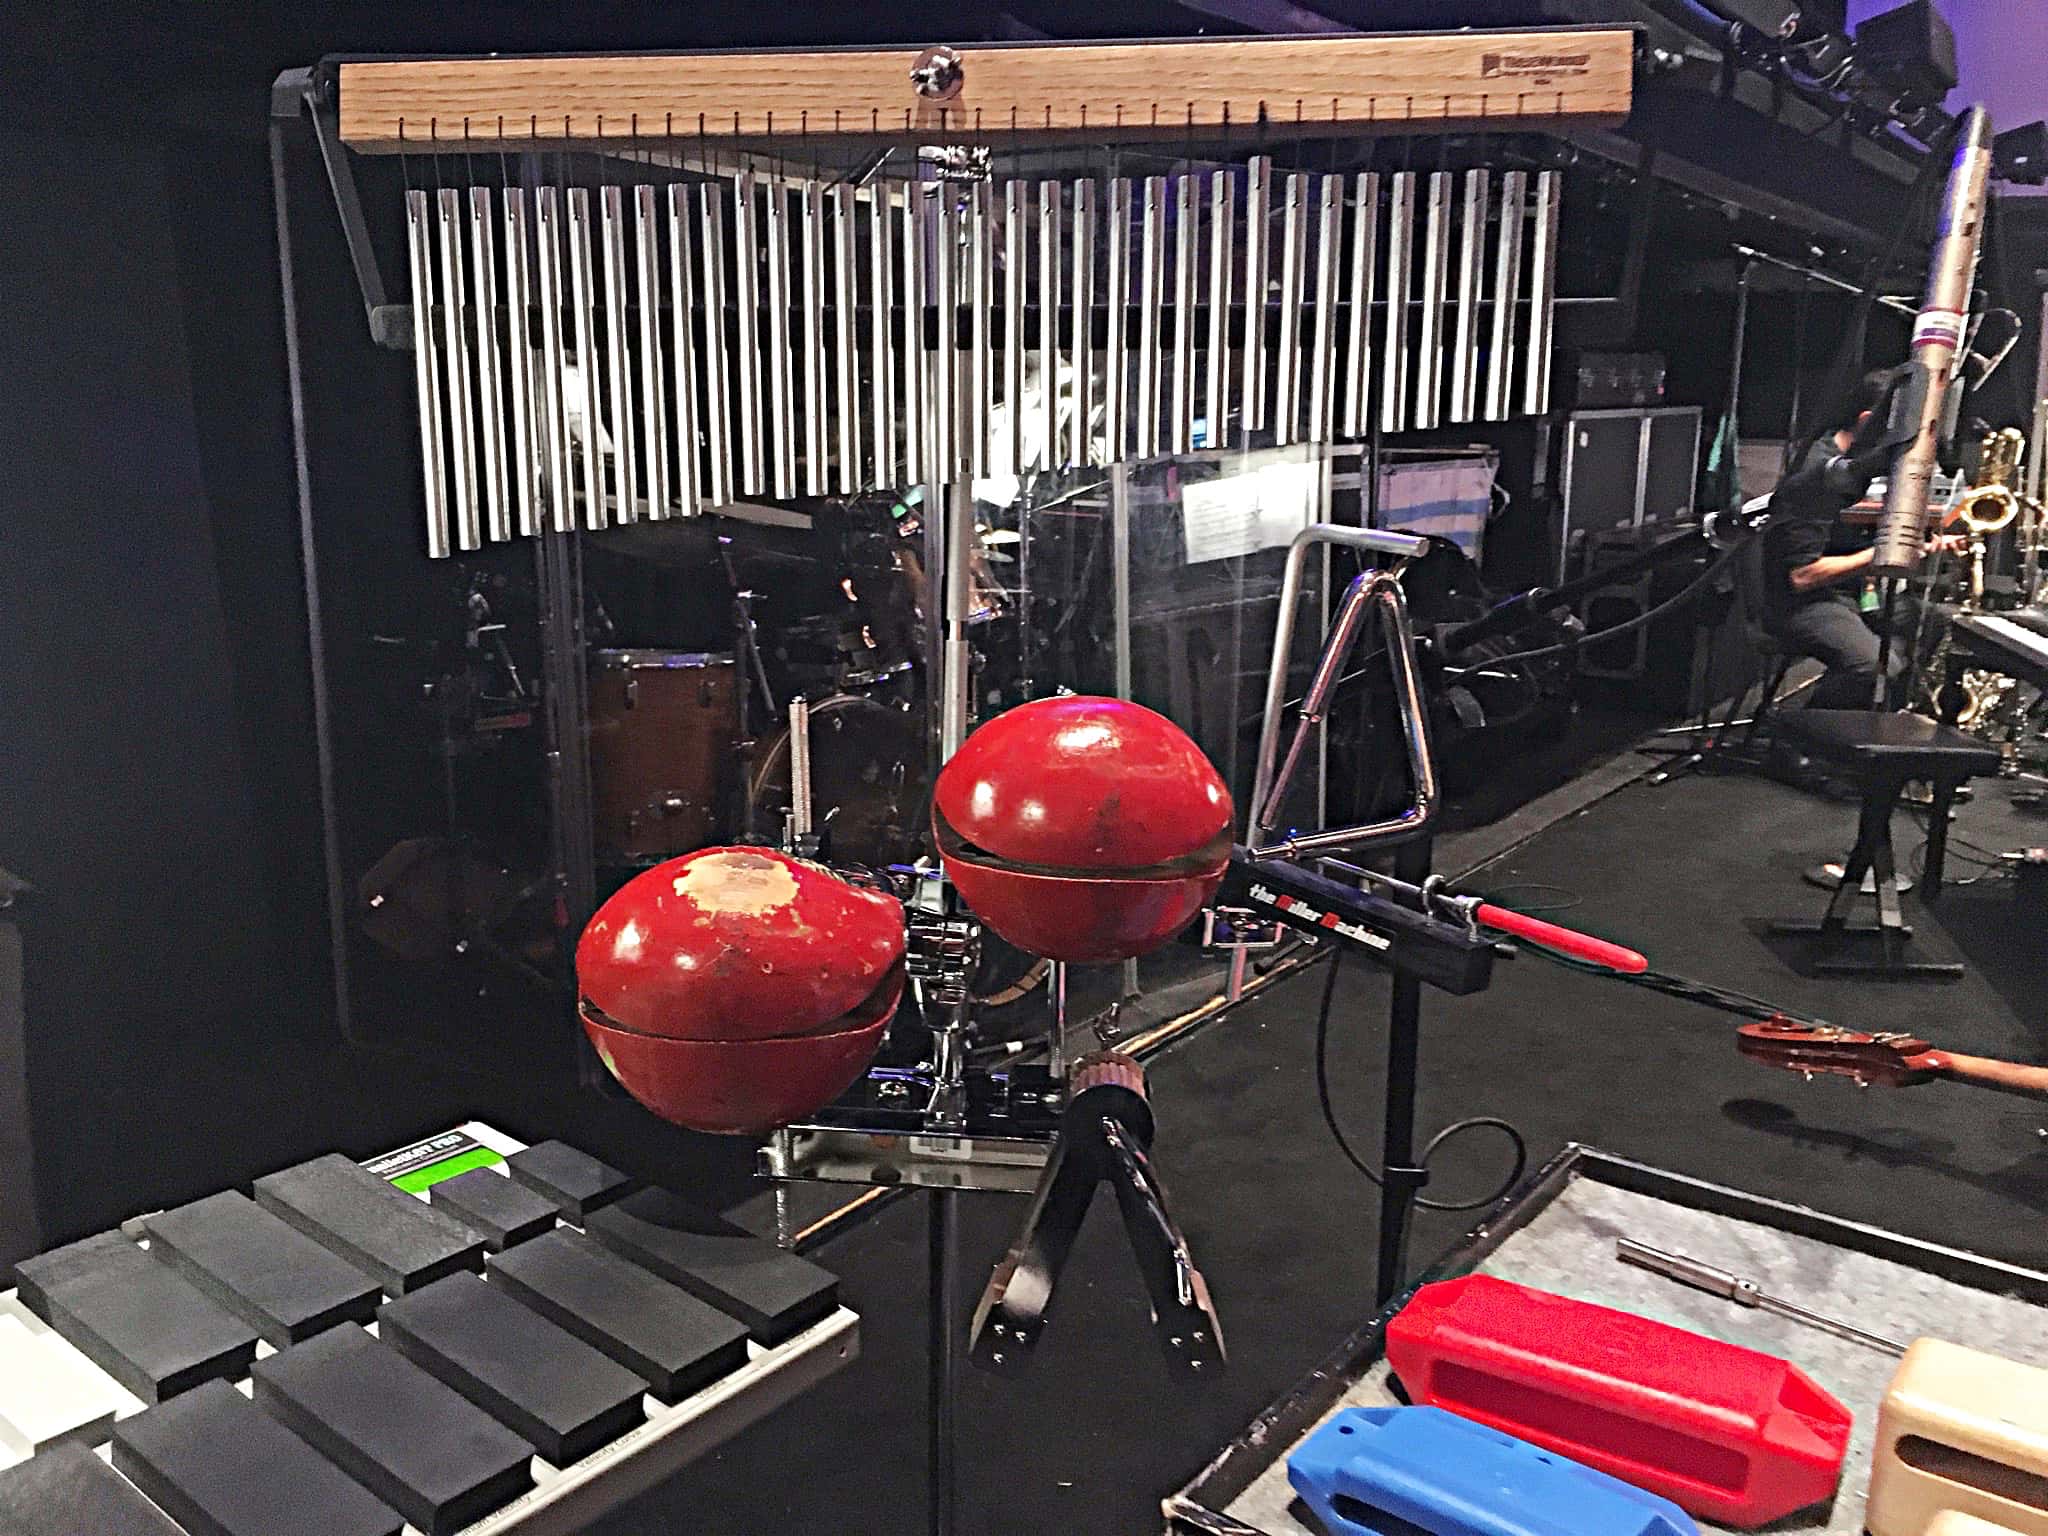 Laura Hamel's percussion setup for the National Tour of A Christmas Story at the McCallum Theatre in Palm Desert, California.